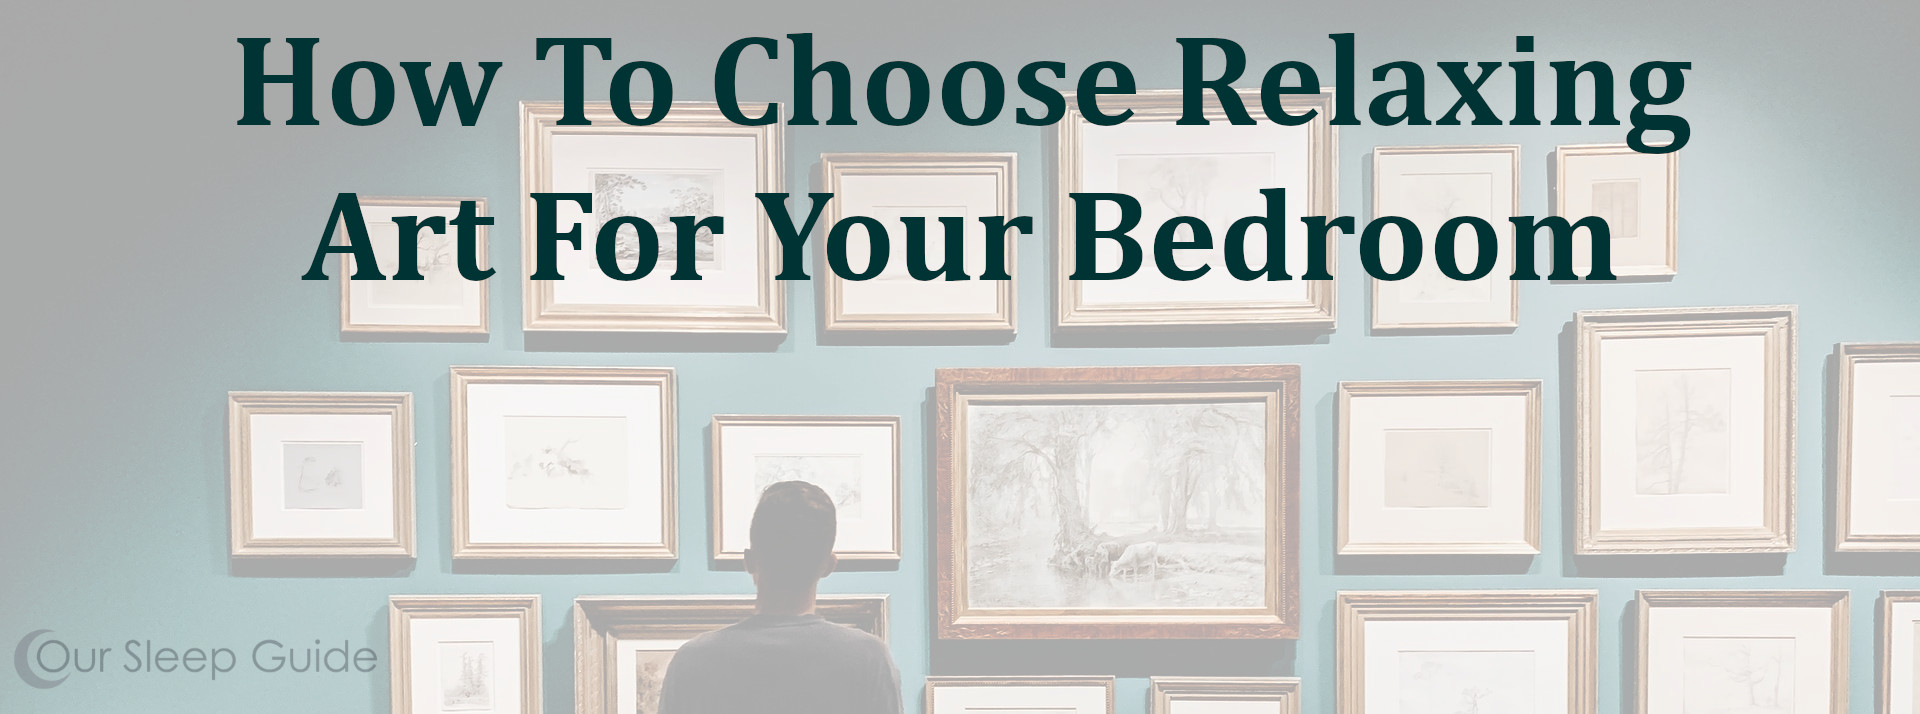 how to choose relaxing art for your bedroom